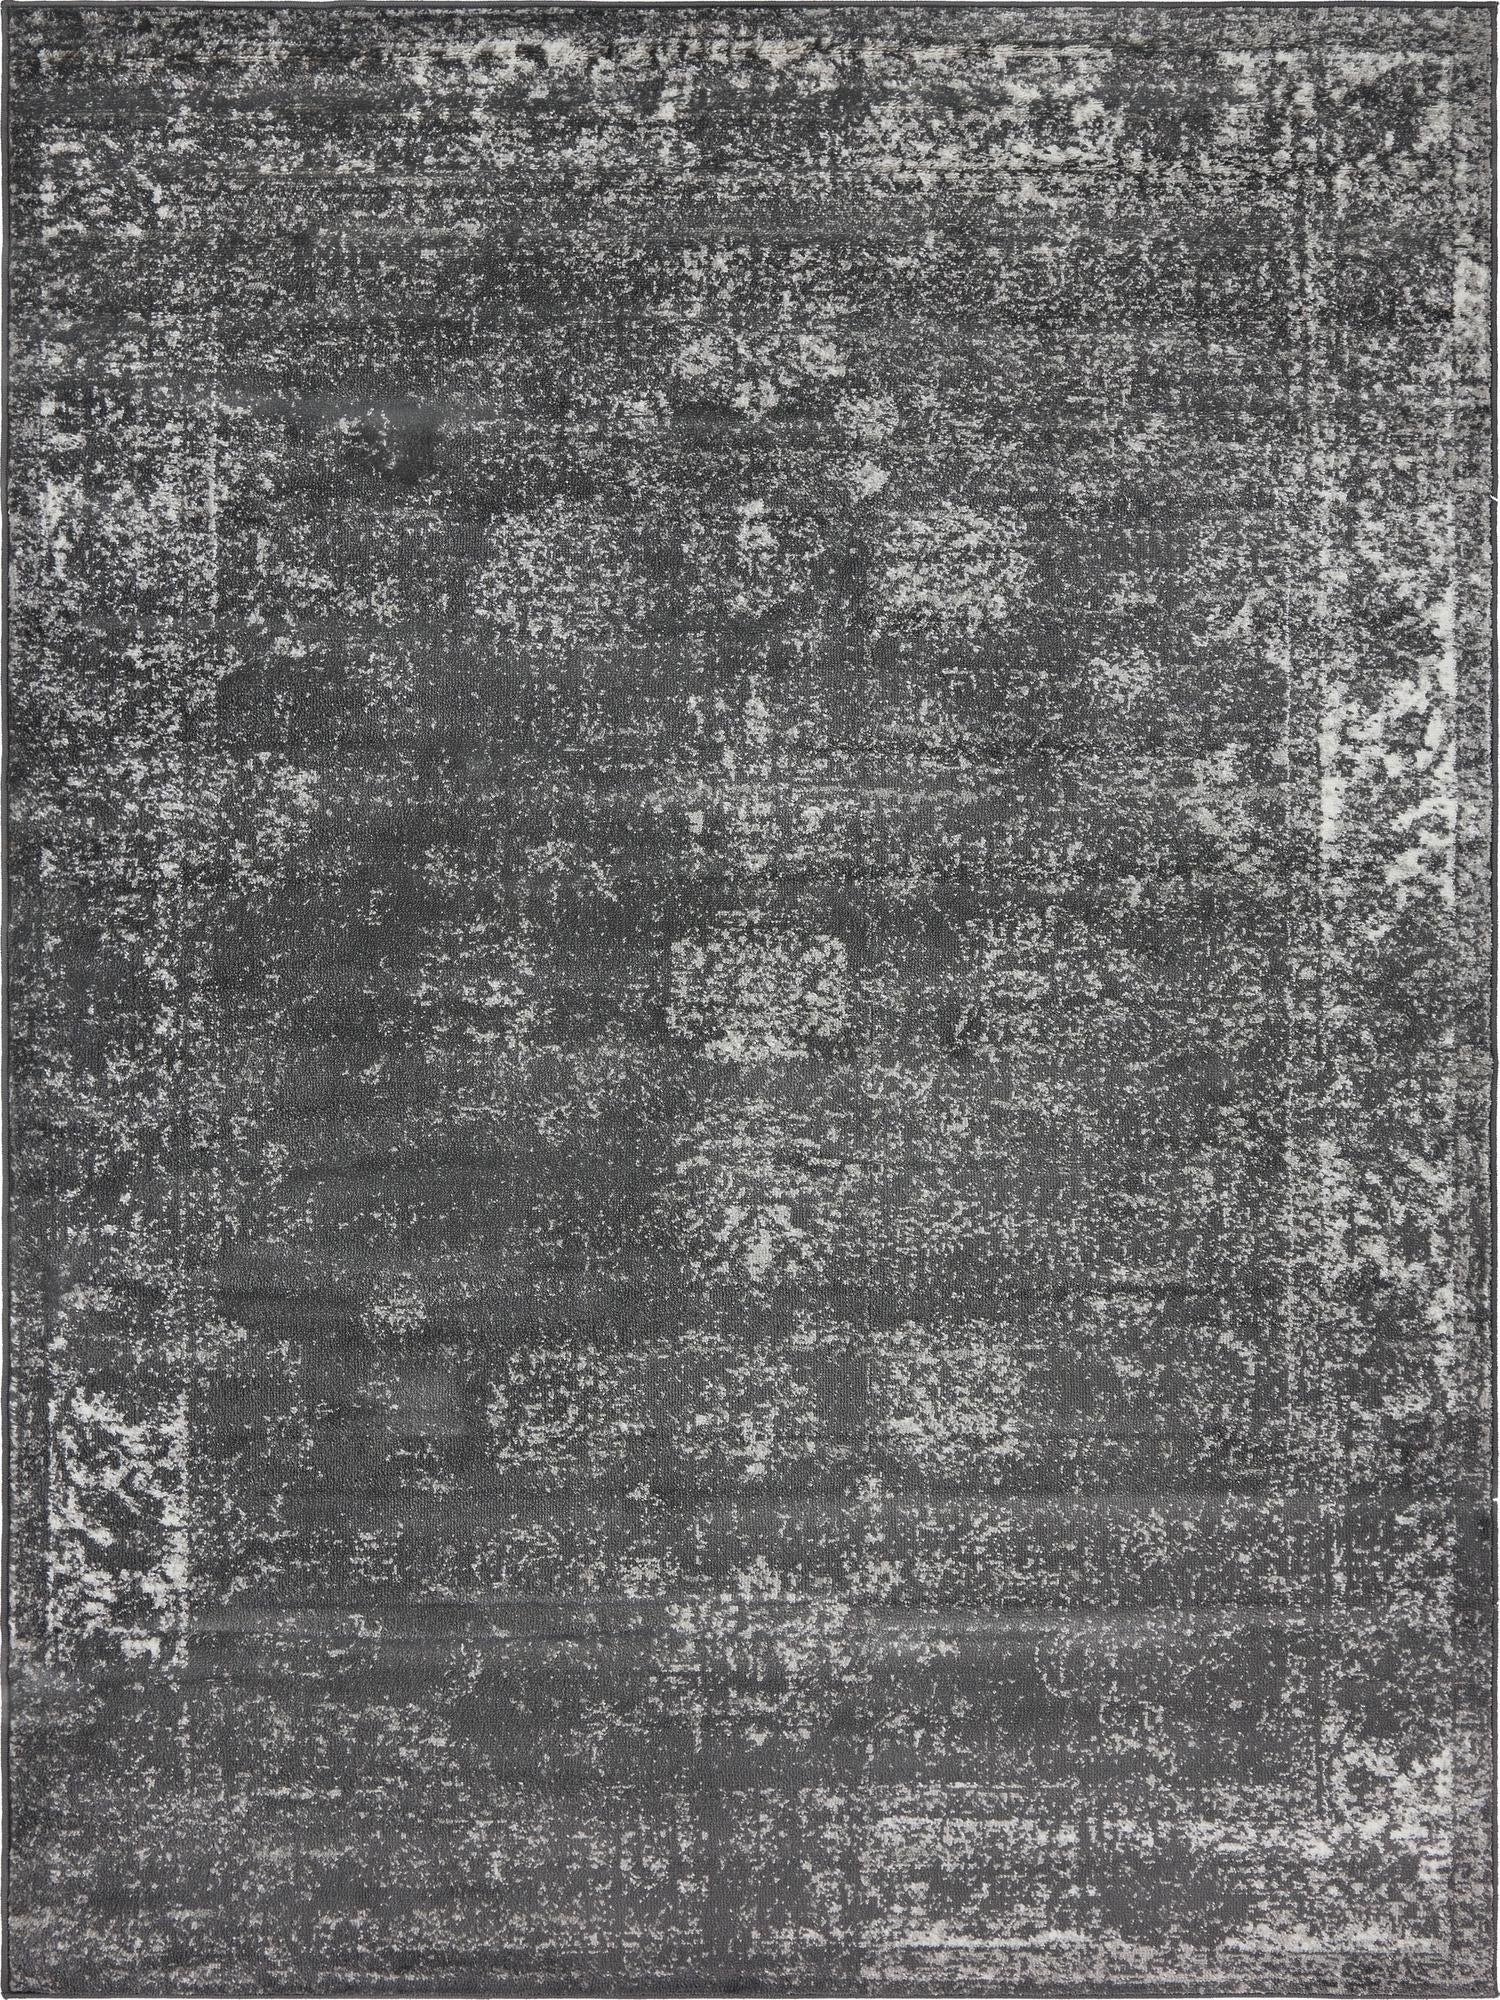 Unique Loom Casino Sofia Rug Dark Gray/Ivory 9' x 12' Rectangle Floral Bohemian Perfect For Living Room Bed Room Dining Room Office - image 3 of 8